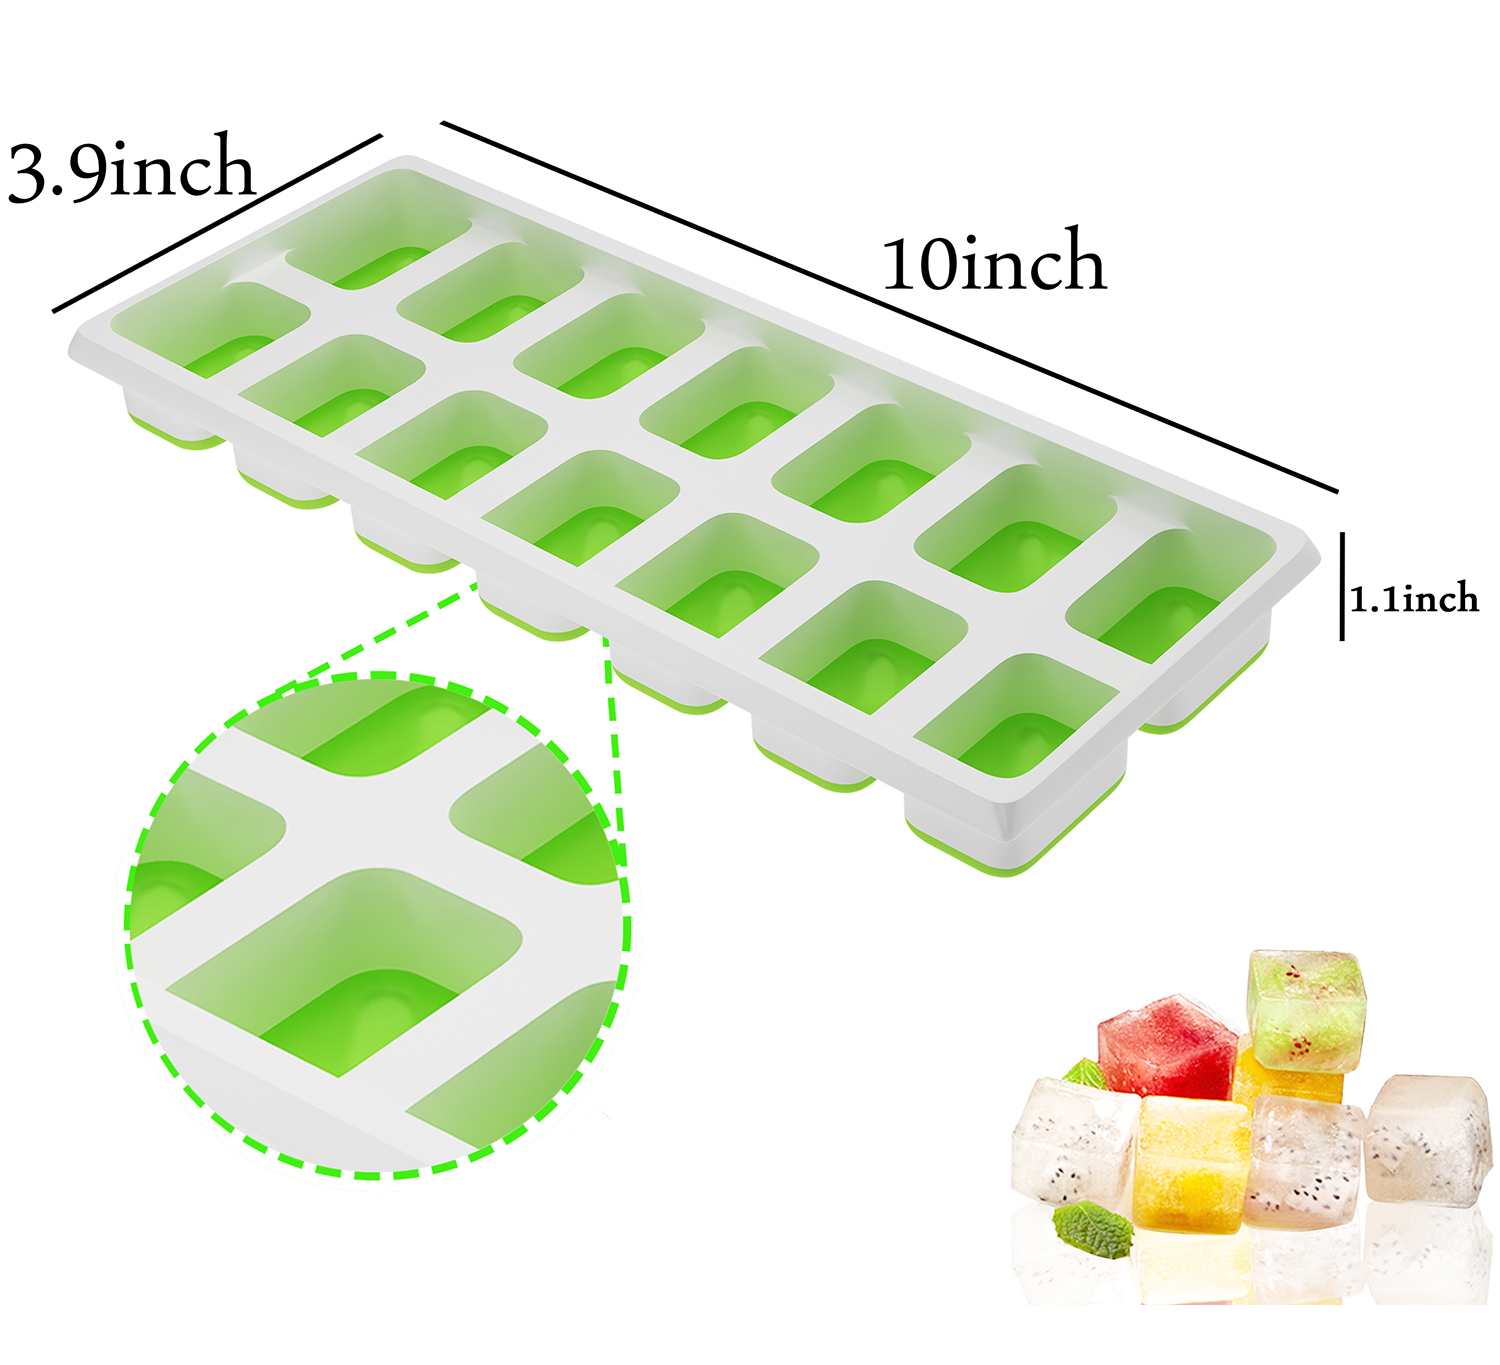 Ouddy 4 Pack Ice Cube Trays with Lid, Silicone Ice Cube Molds, 14-Ice Trays Can Make 56 Ice Cubes, BPA Free Nontoxic and Safe, Stackable Durable ( Blue & Green )